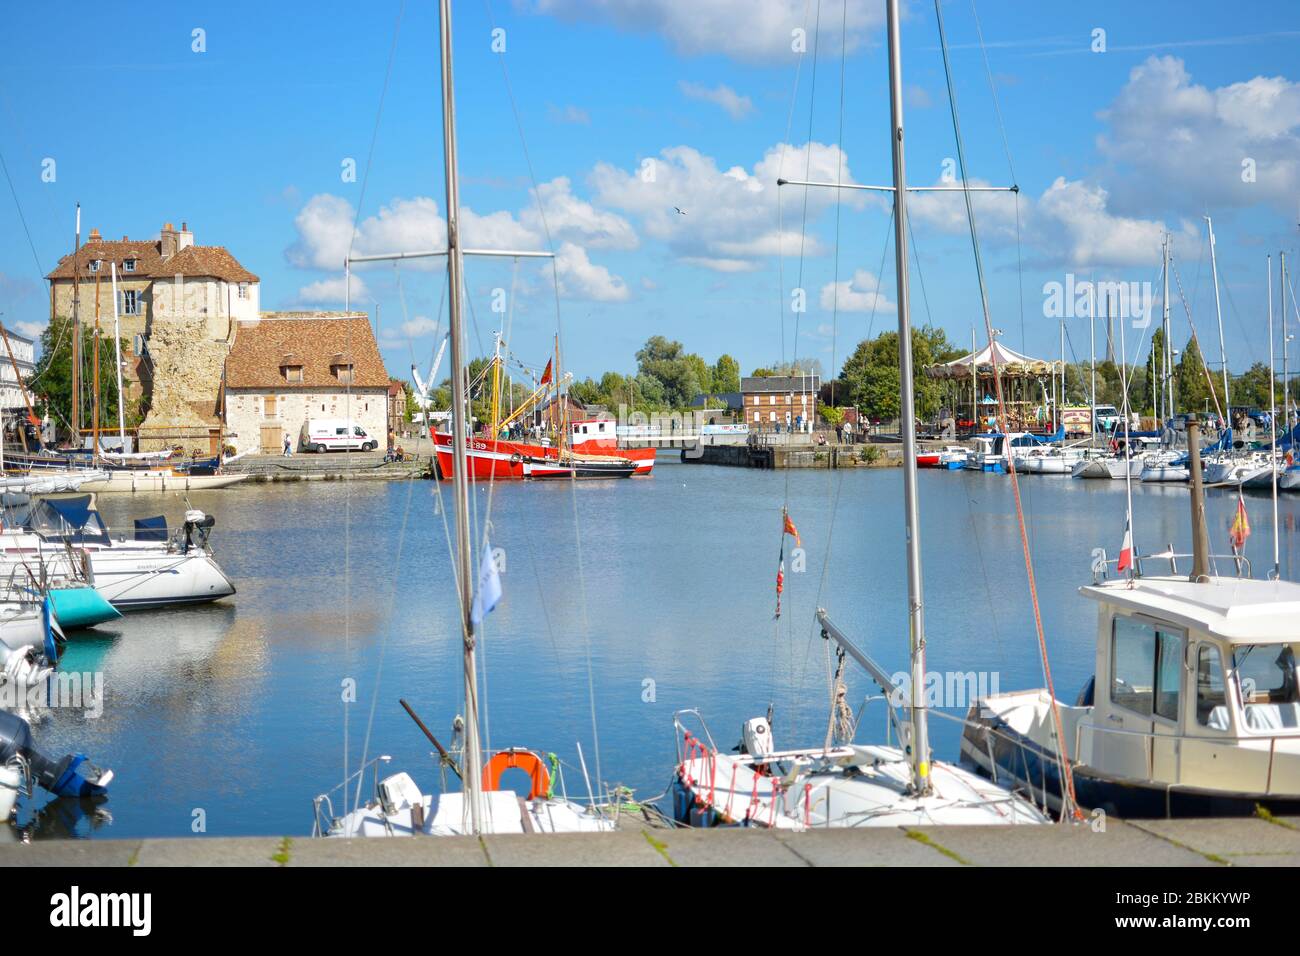 Boats, yachts and fishing vessels line the old harbor or Vieux Bassin in the charming Normandy village of Honfleur, France Stock Photo